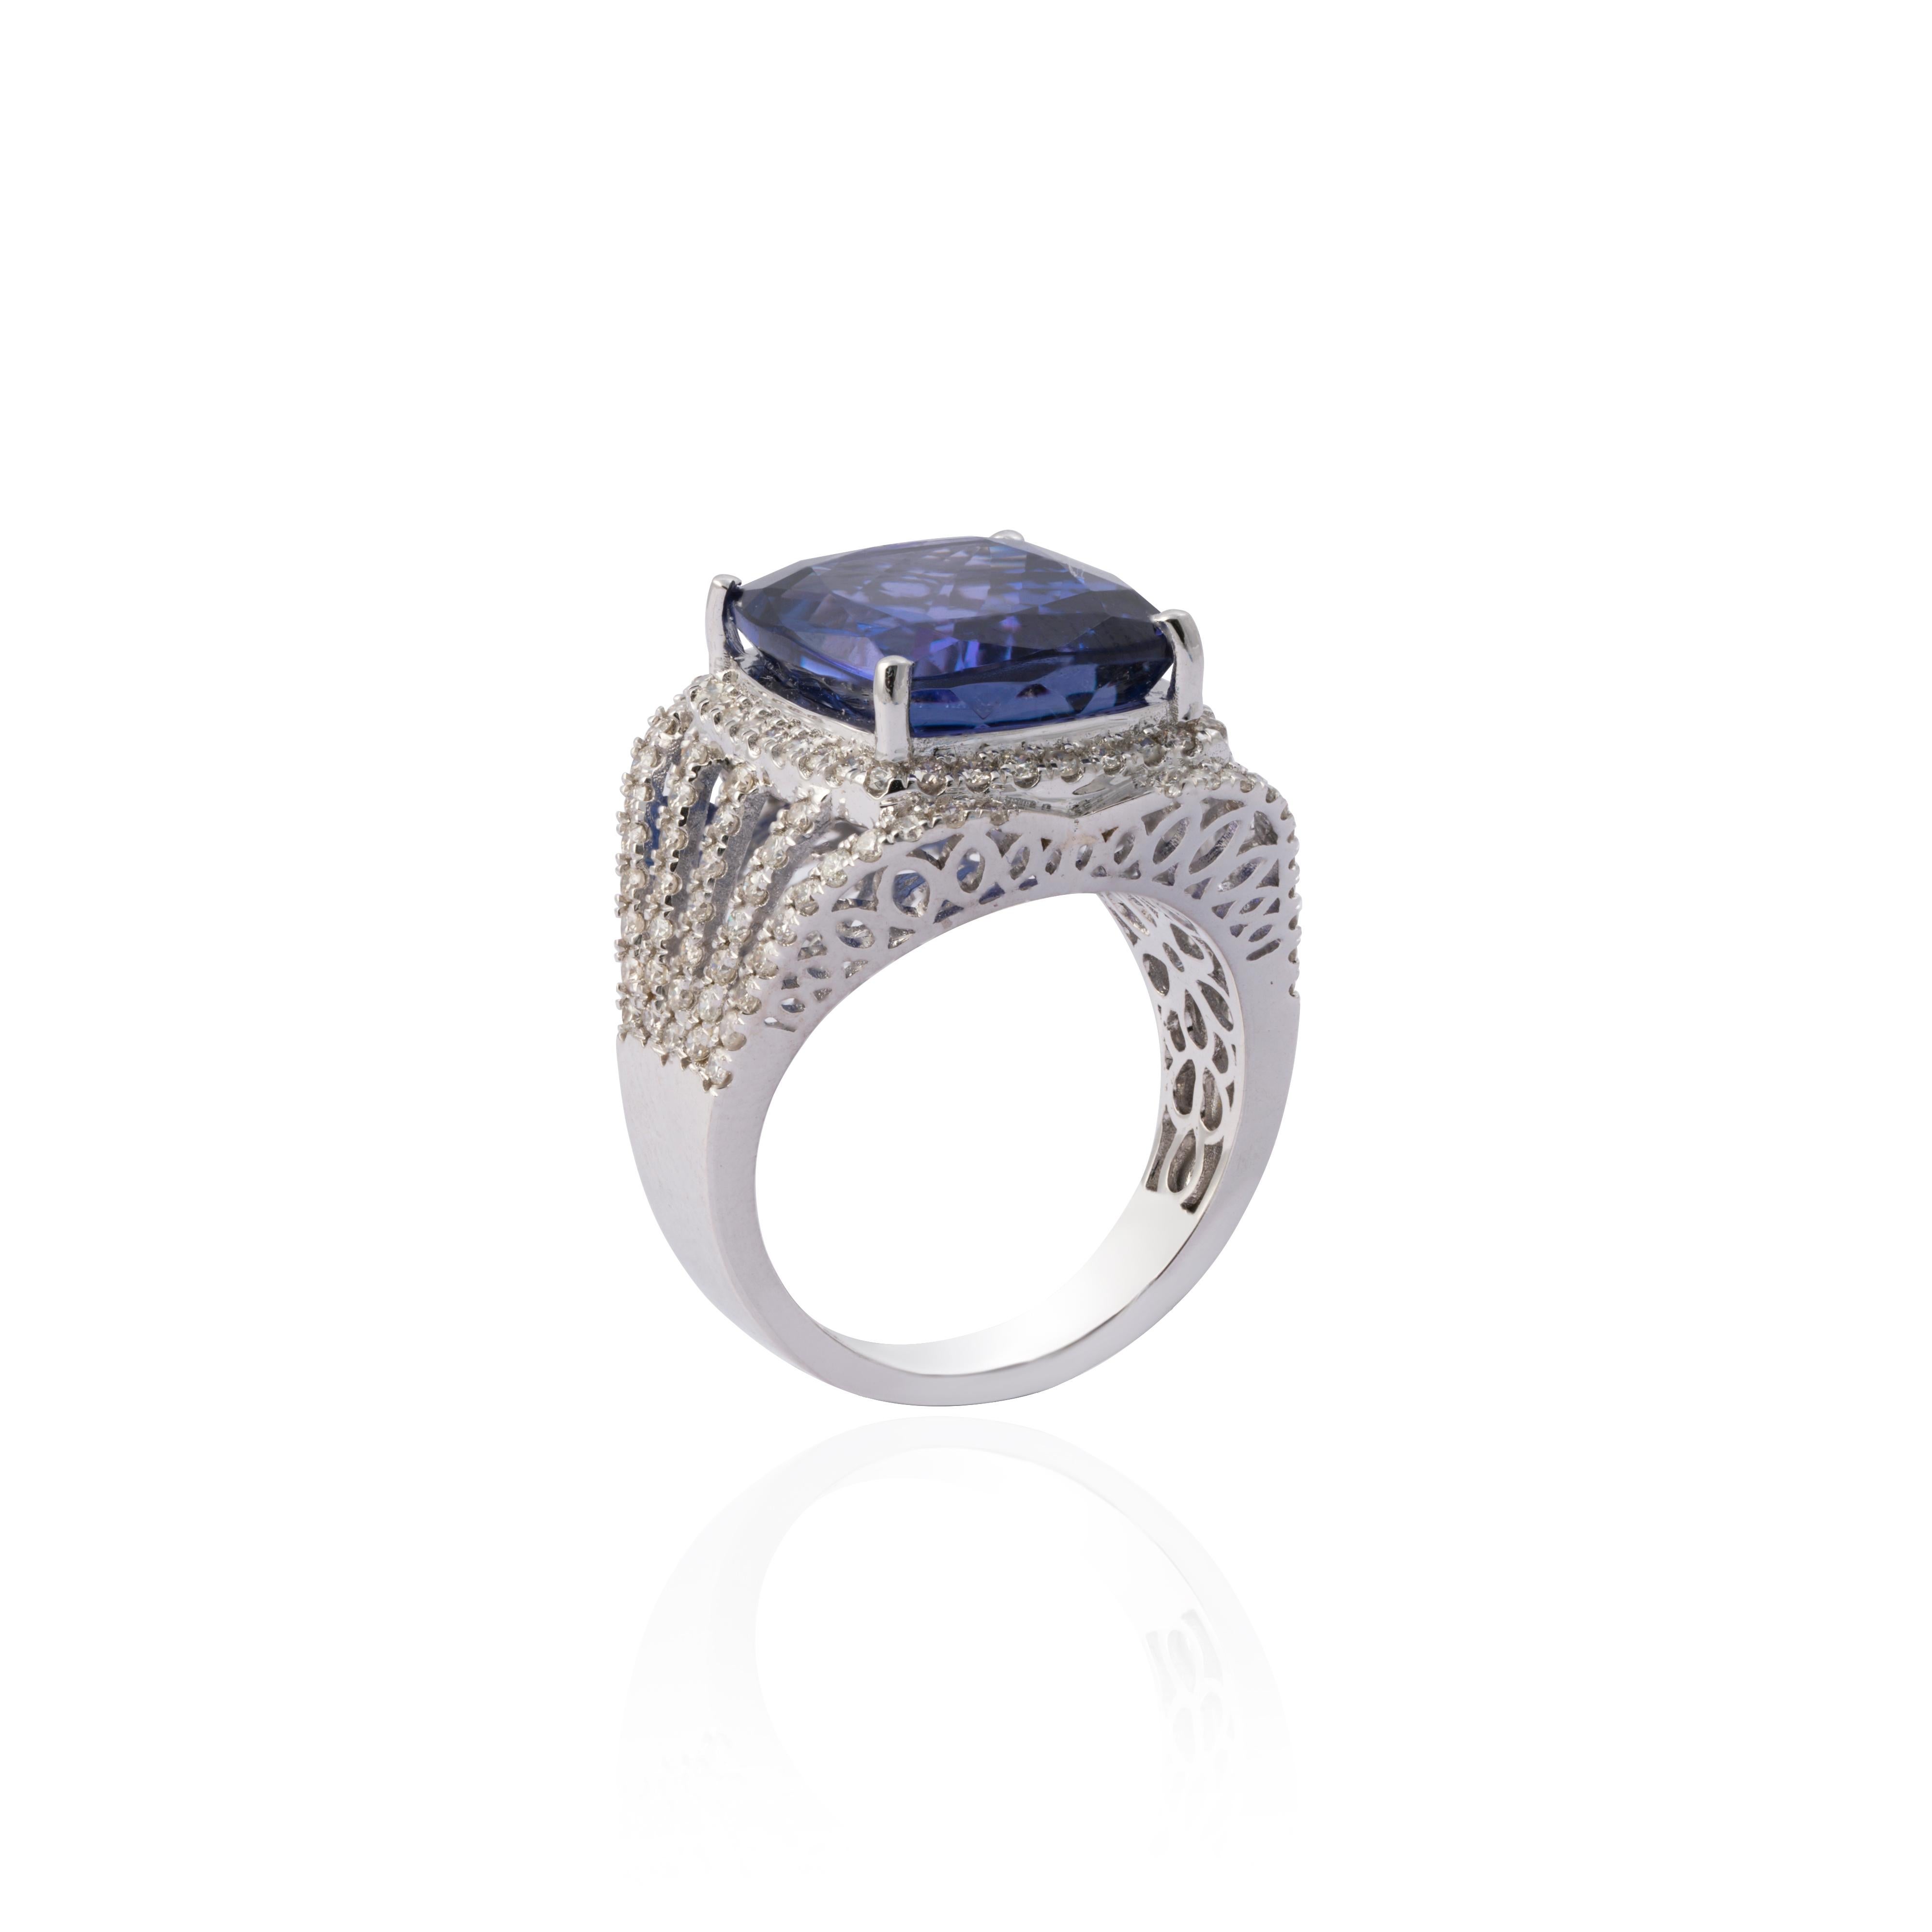 This is a beautiful natural tanzanite cushion shape tanzanite ring with 14k gold and diamonds.

tanzanite is very good colour and excellent quality and diamonds are of vsi purity and G colour.  

tanzanite : 11.14 cts
diamond : 1.09 cts
gold : 7.69